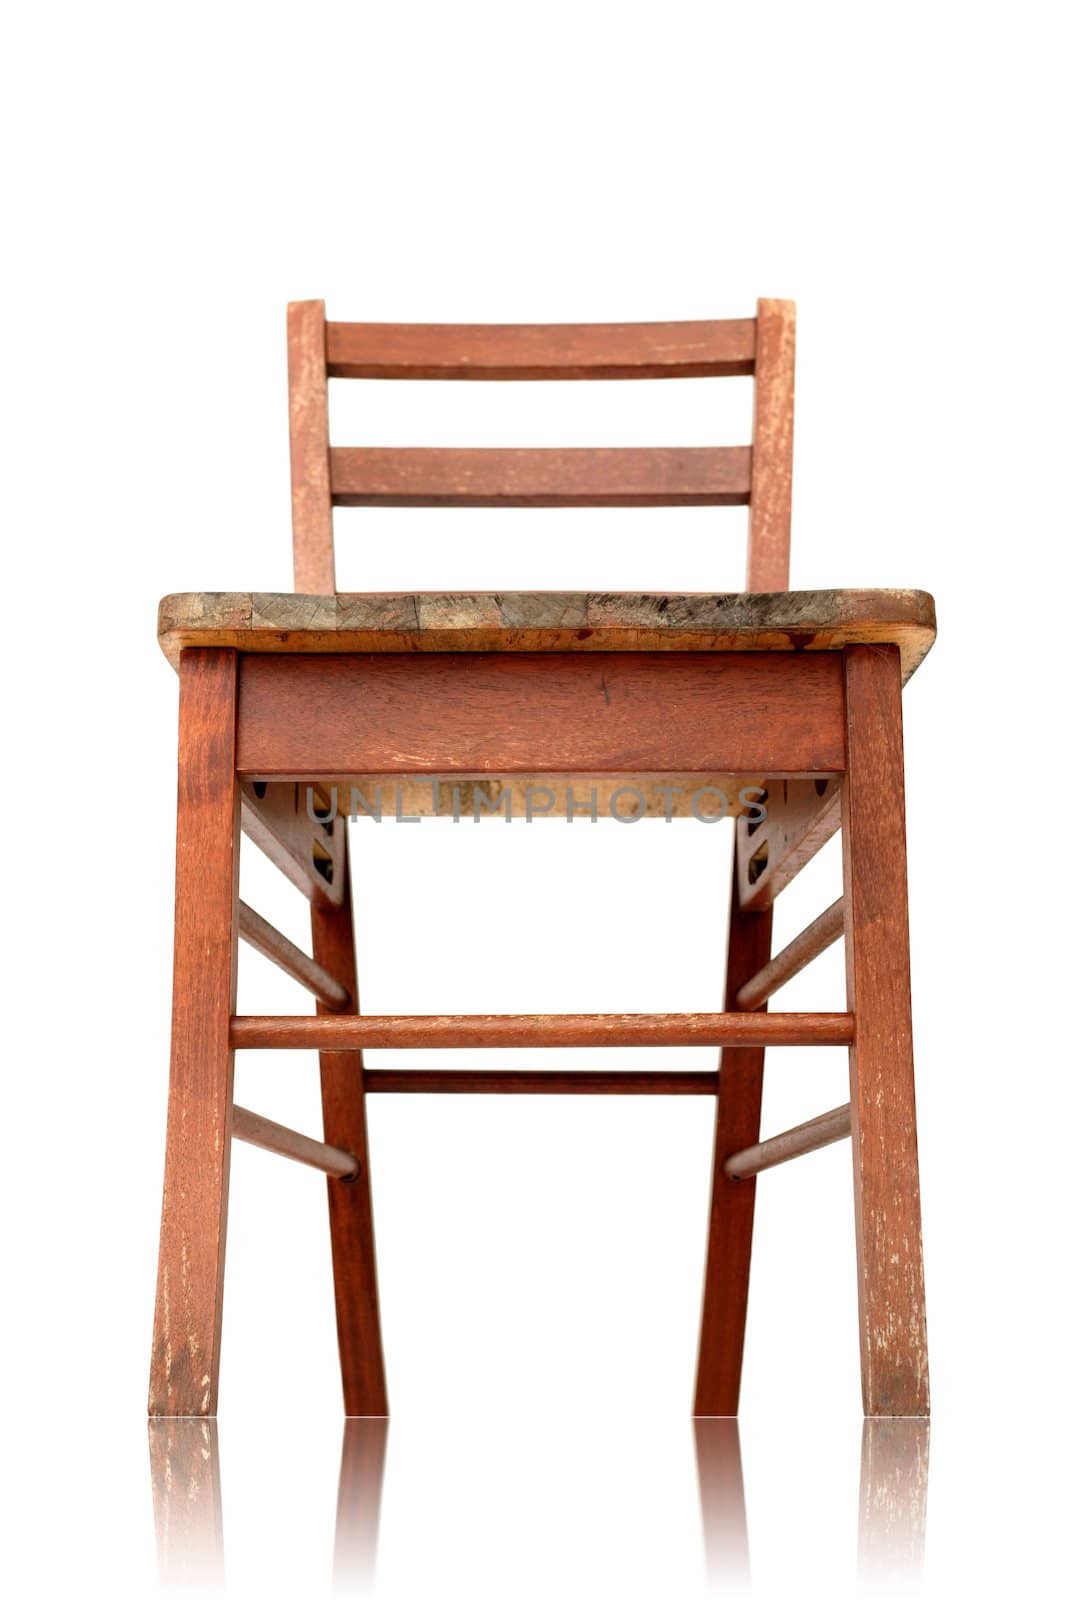 A wooden chair isolated against a white background